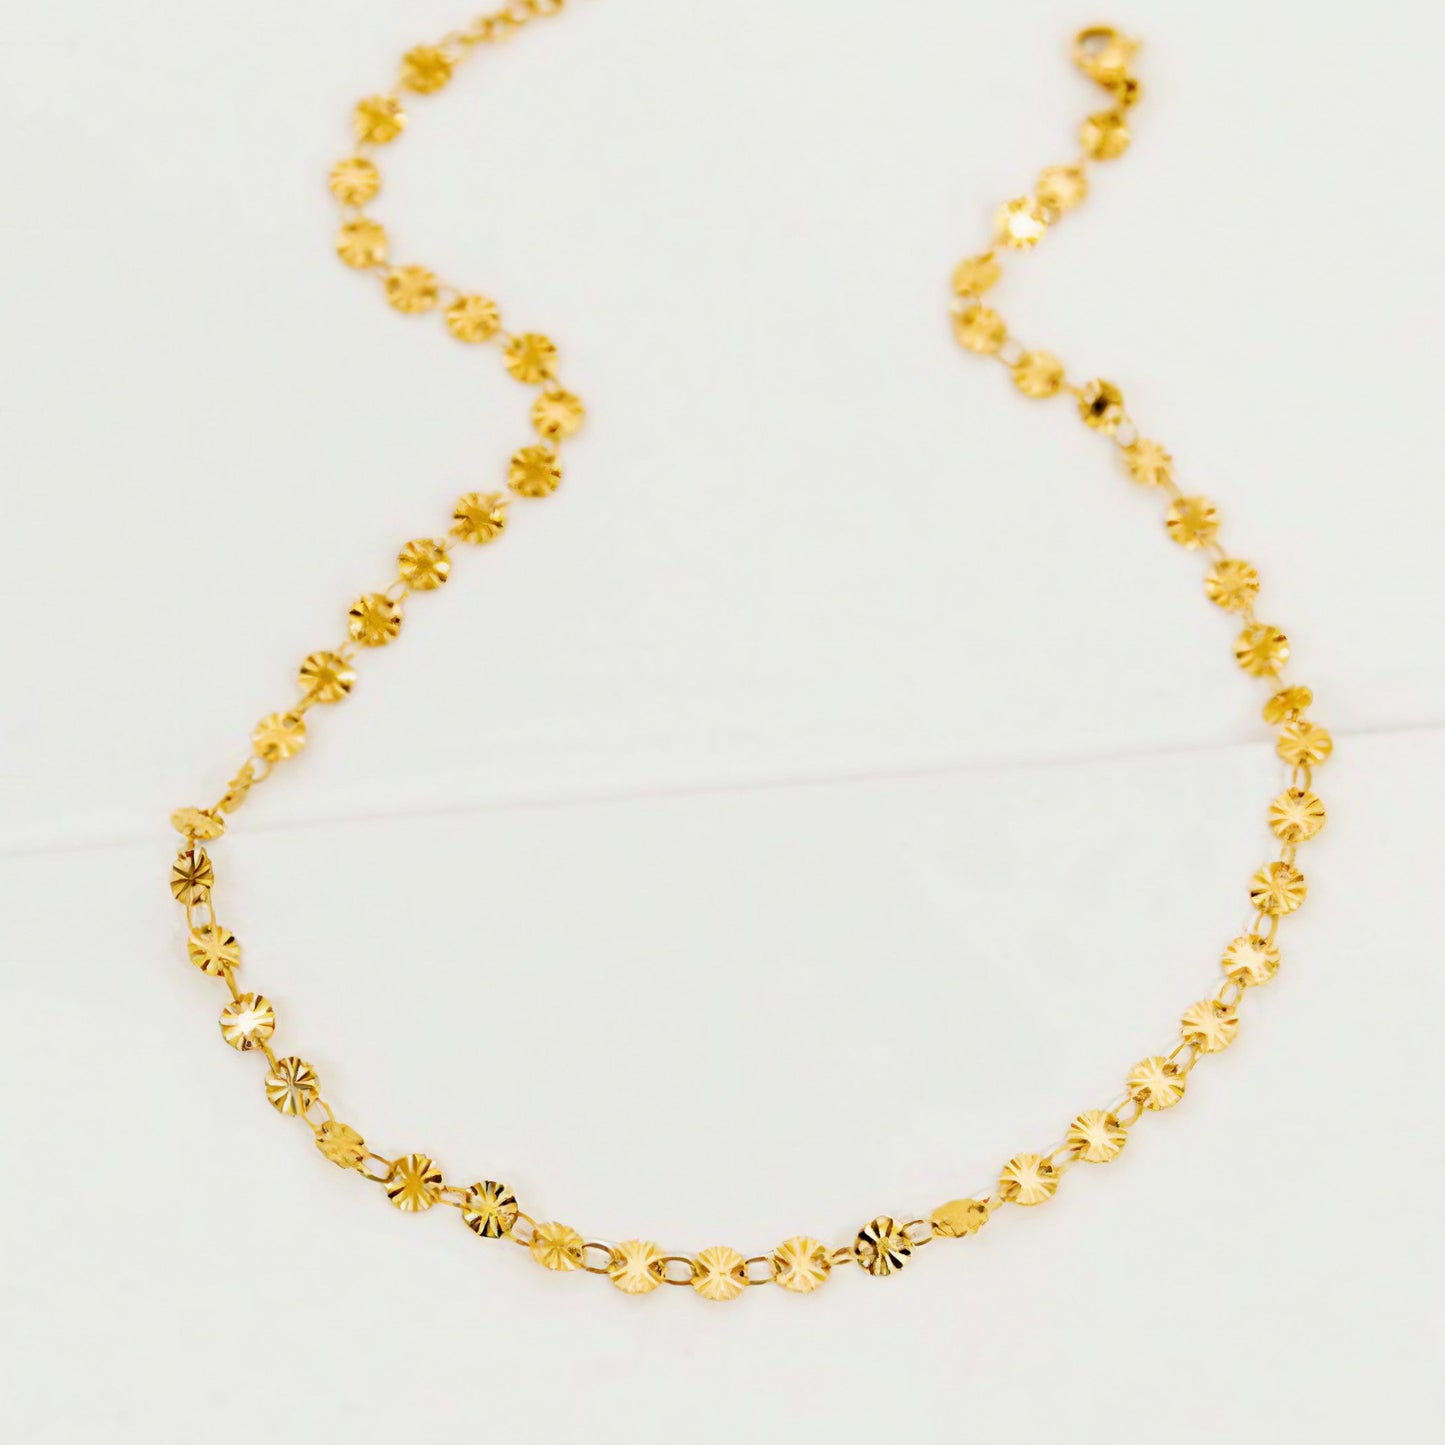 Ruffled Gold Circle Charm Necklace